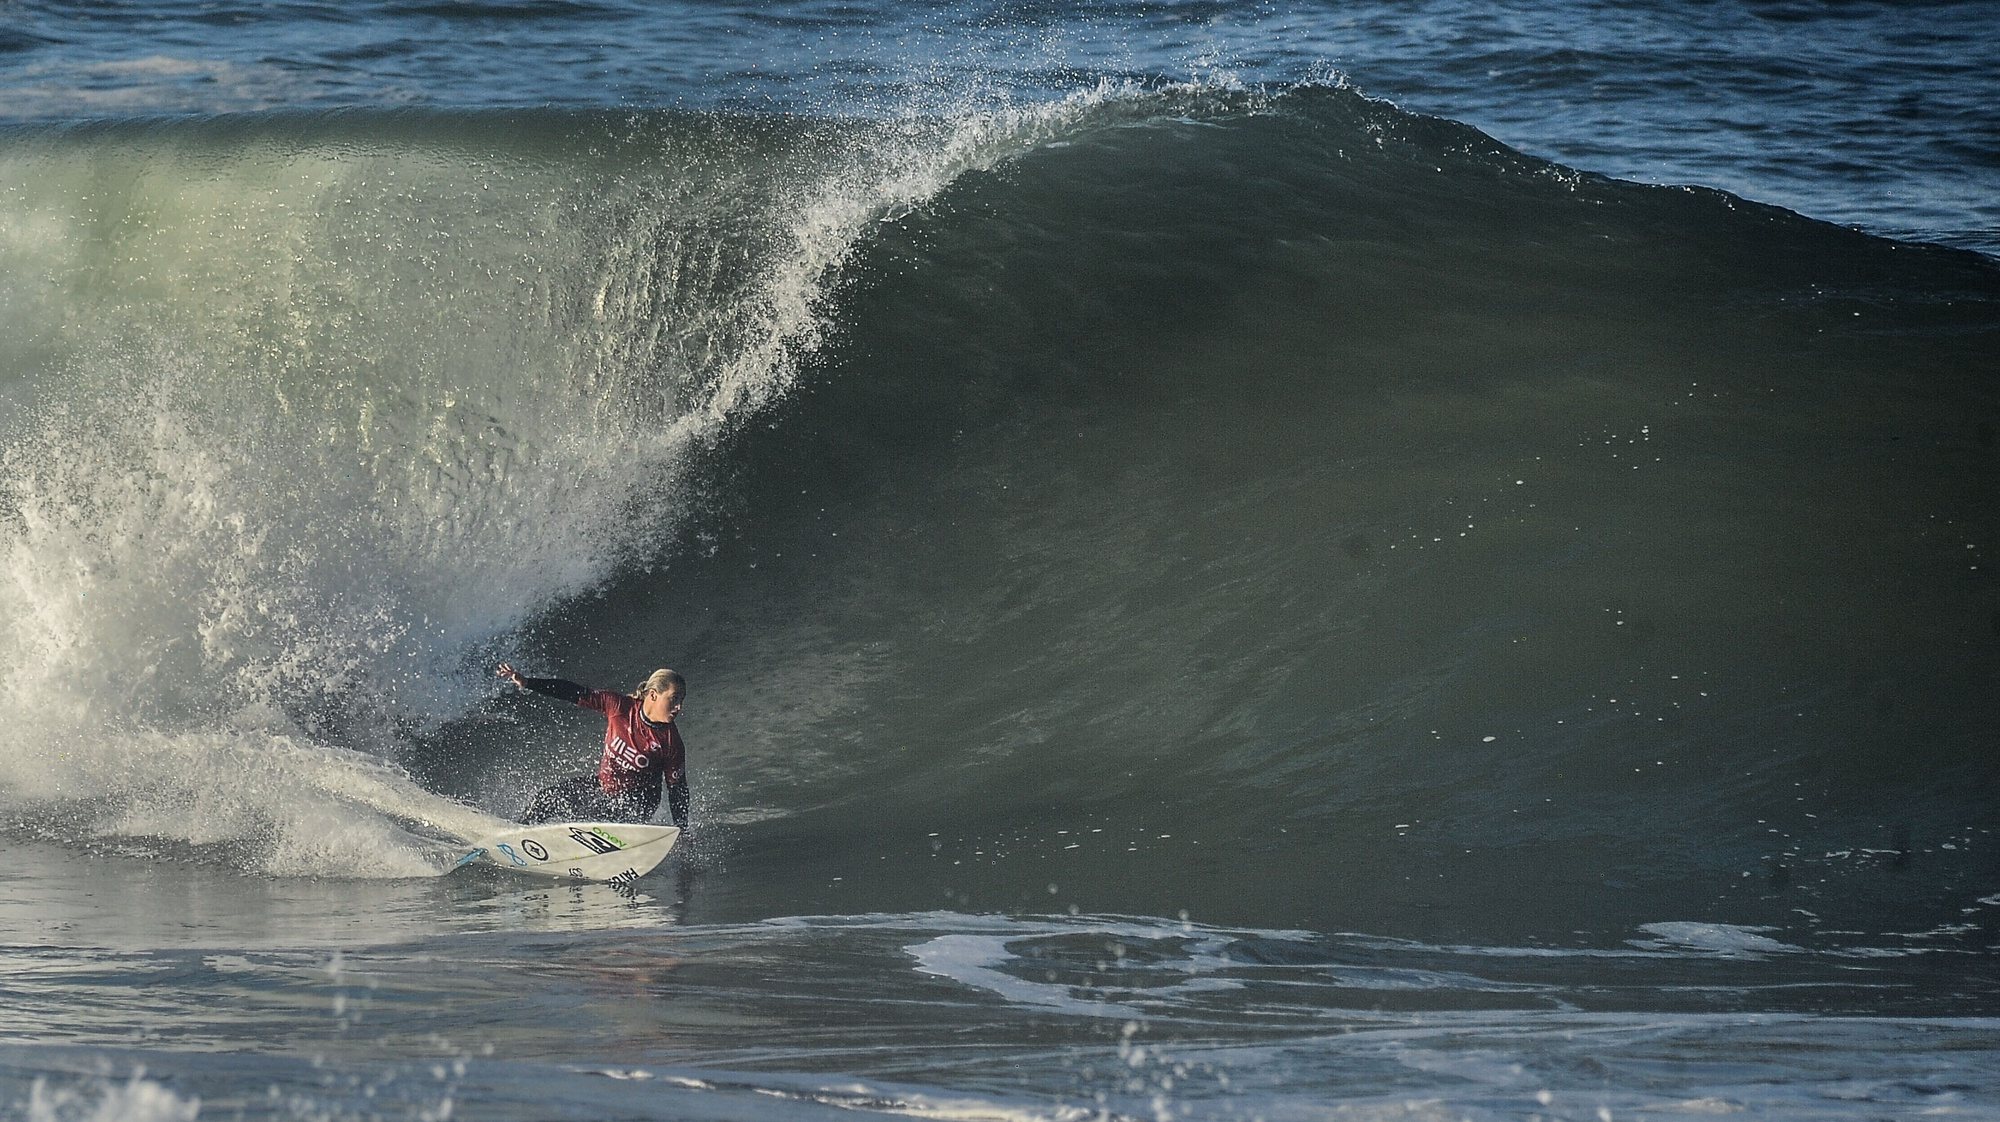 Portuguese surfer Yolanda Hopkins during the Meo Rip Curl Pro Portugal, the third stage of the world surfing circuit which takes place in Peniche until the 16th of March at the Super Tubos Beach, Peniche, 14 de march de 2023. CARLOS BARROSO/LUSA